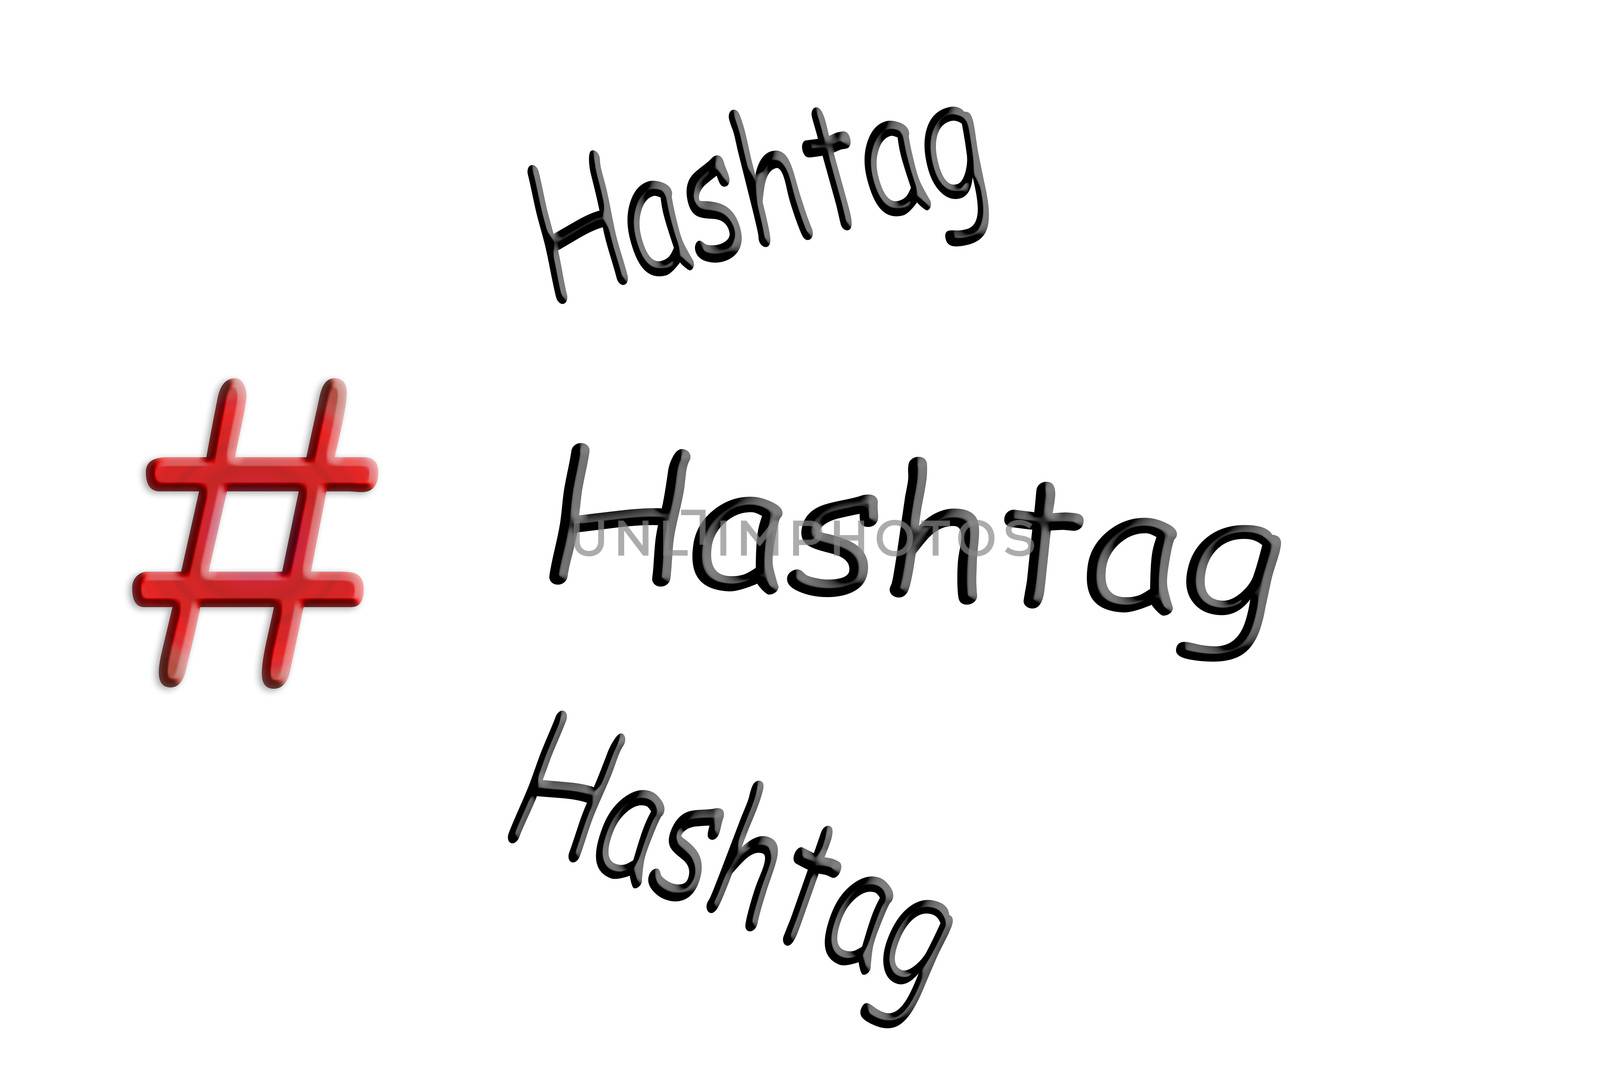 Internet and Social Media Topic # Hashtag  by JFsPic